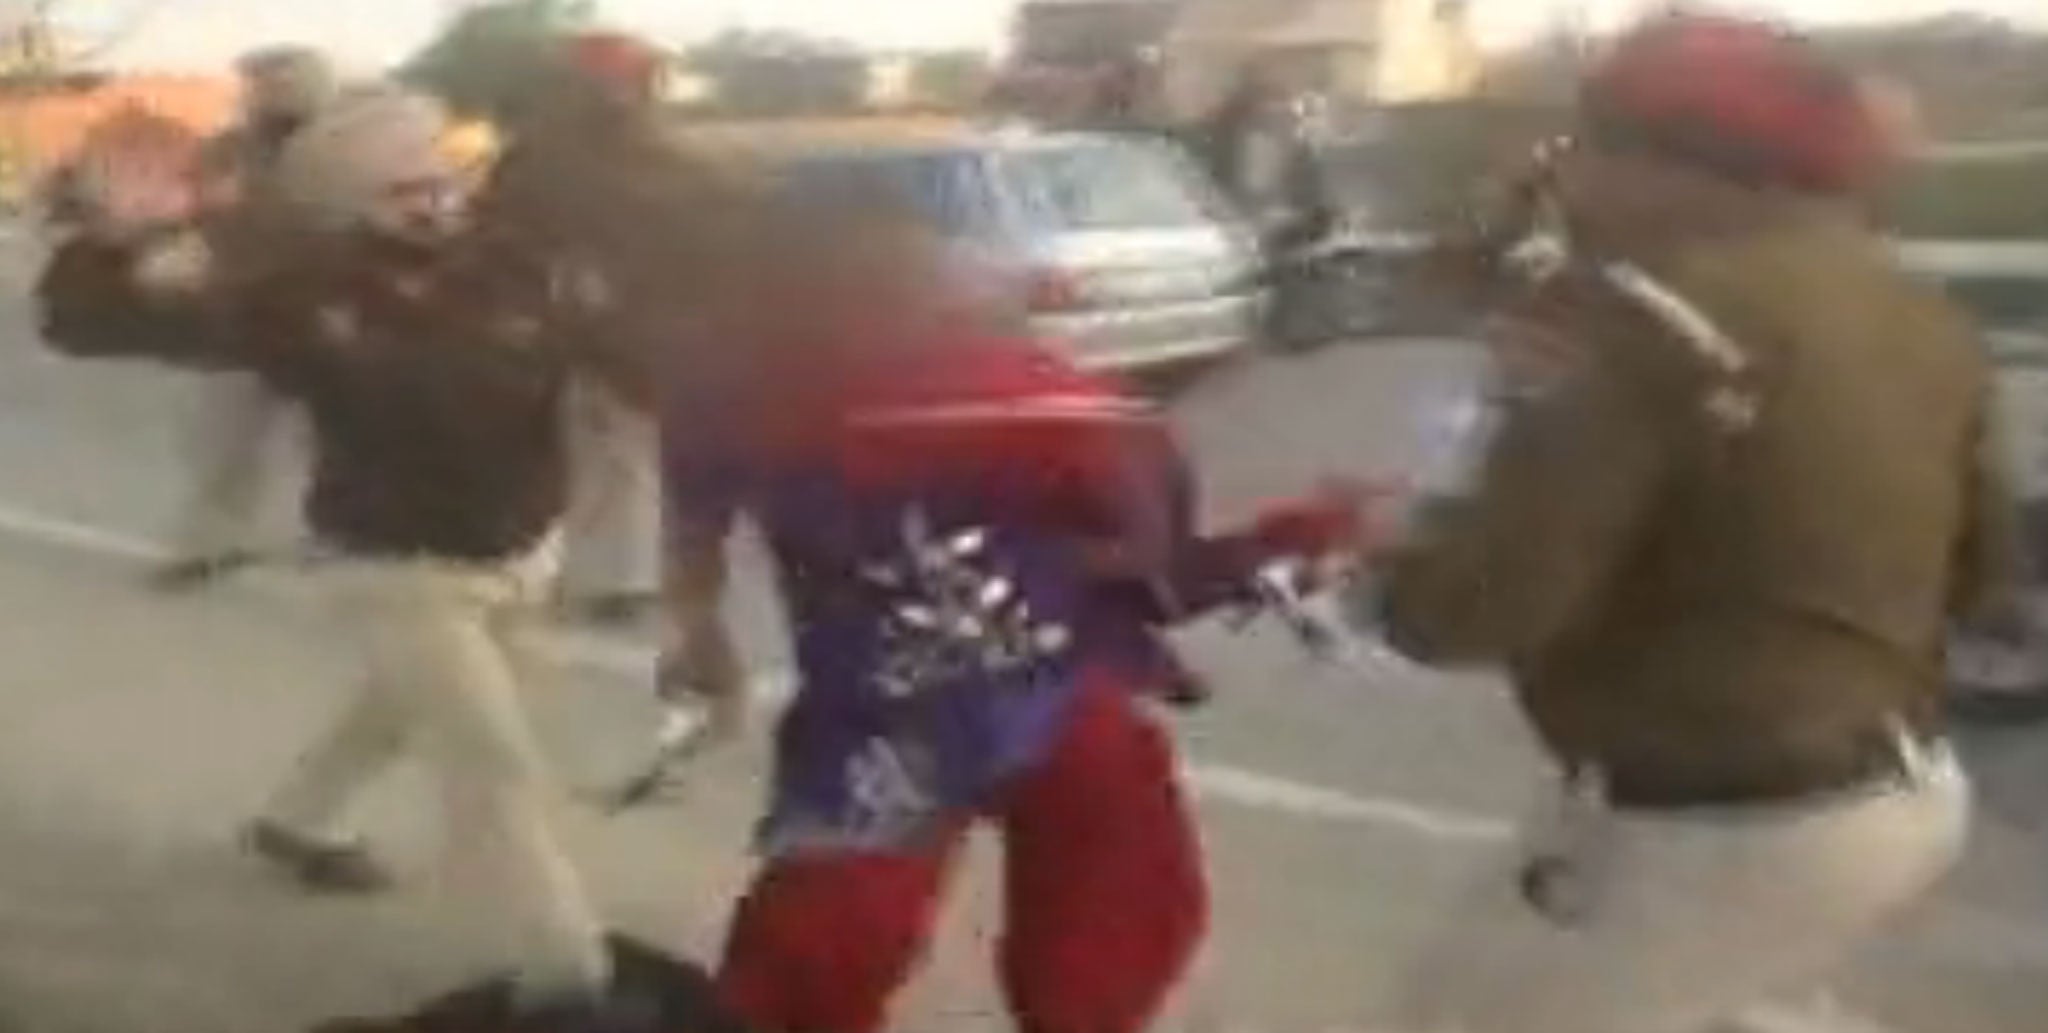 Officers appear to have used large sticks and their fists to brutally assault the 23-year-old